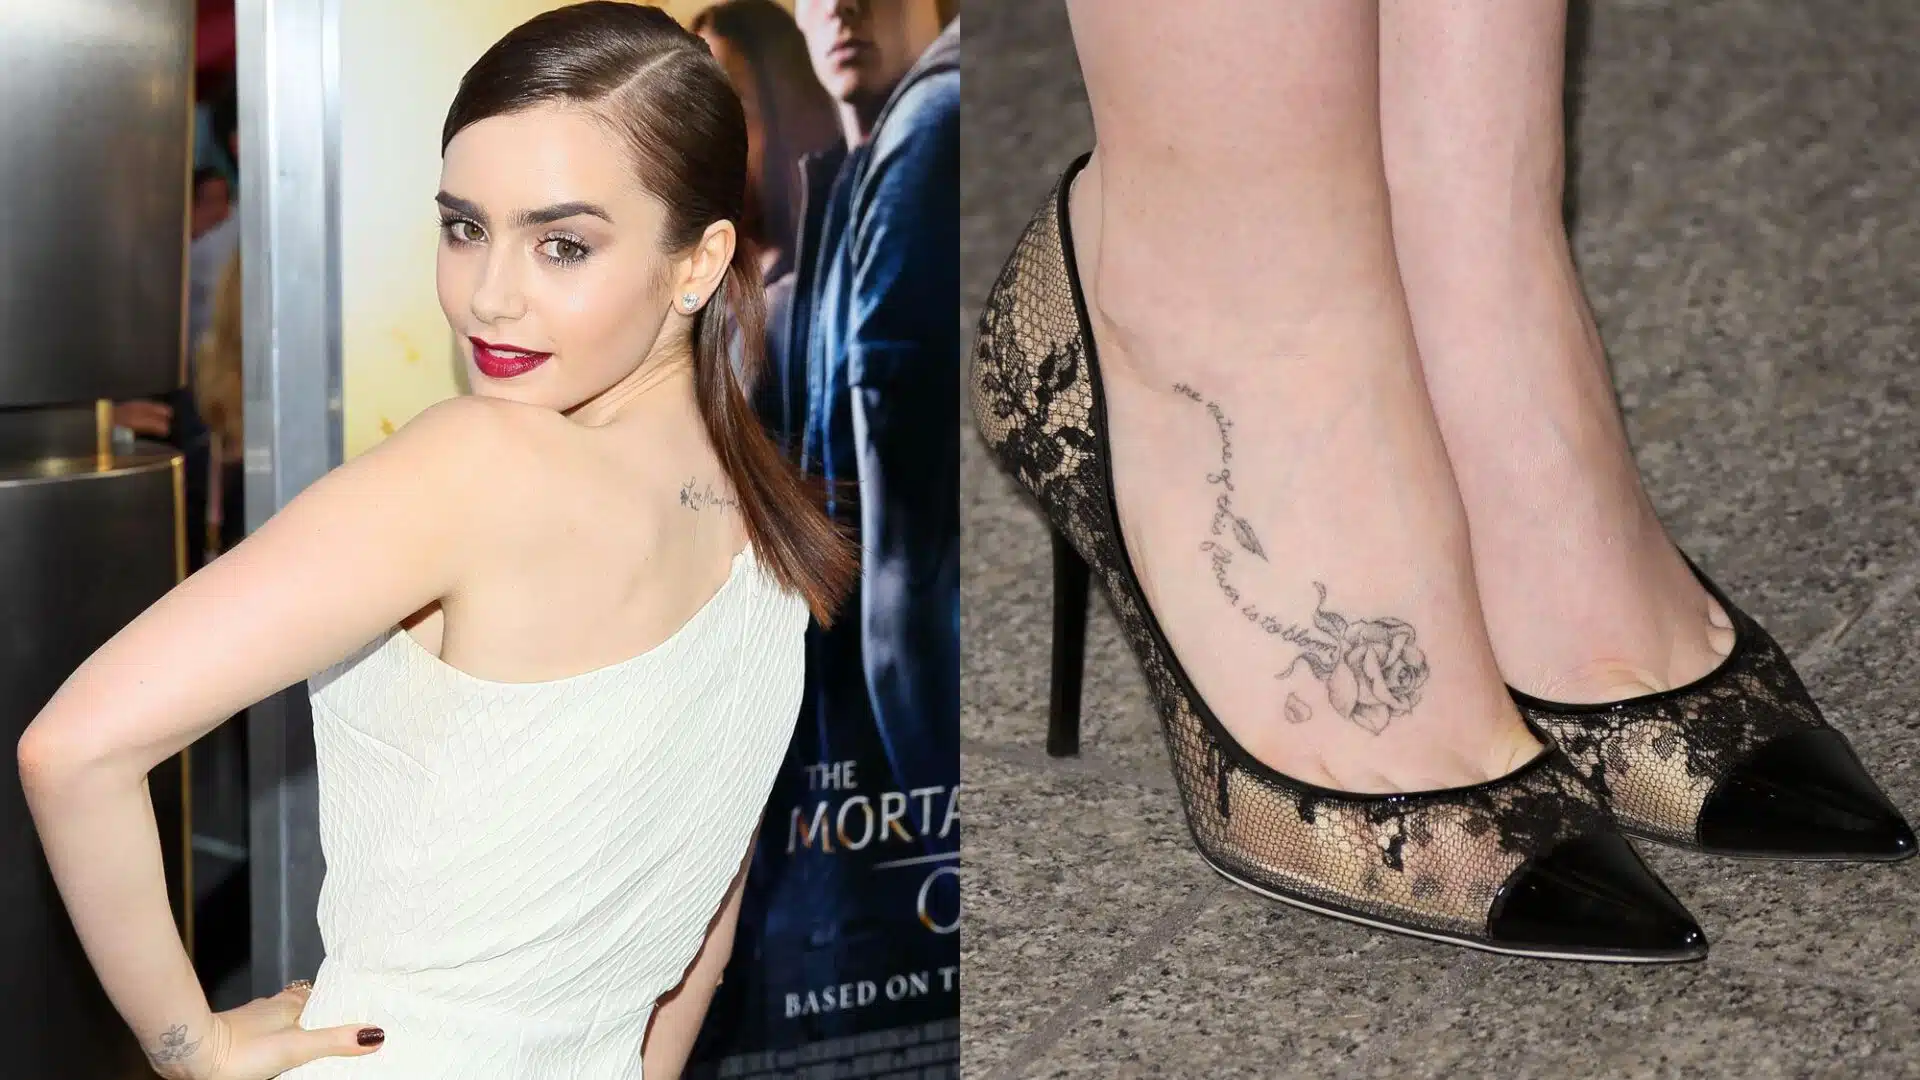 Lily Collinss Rose Tattoo on the Foot